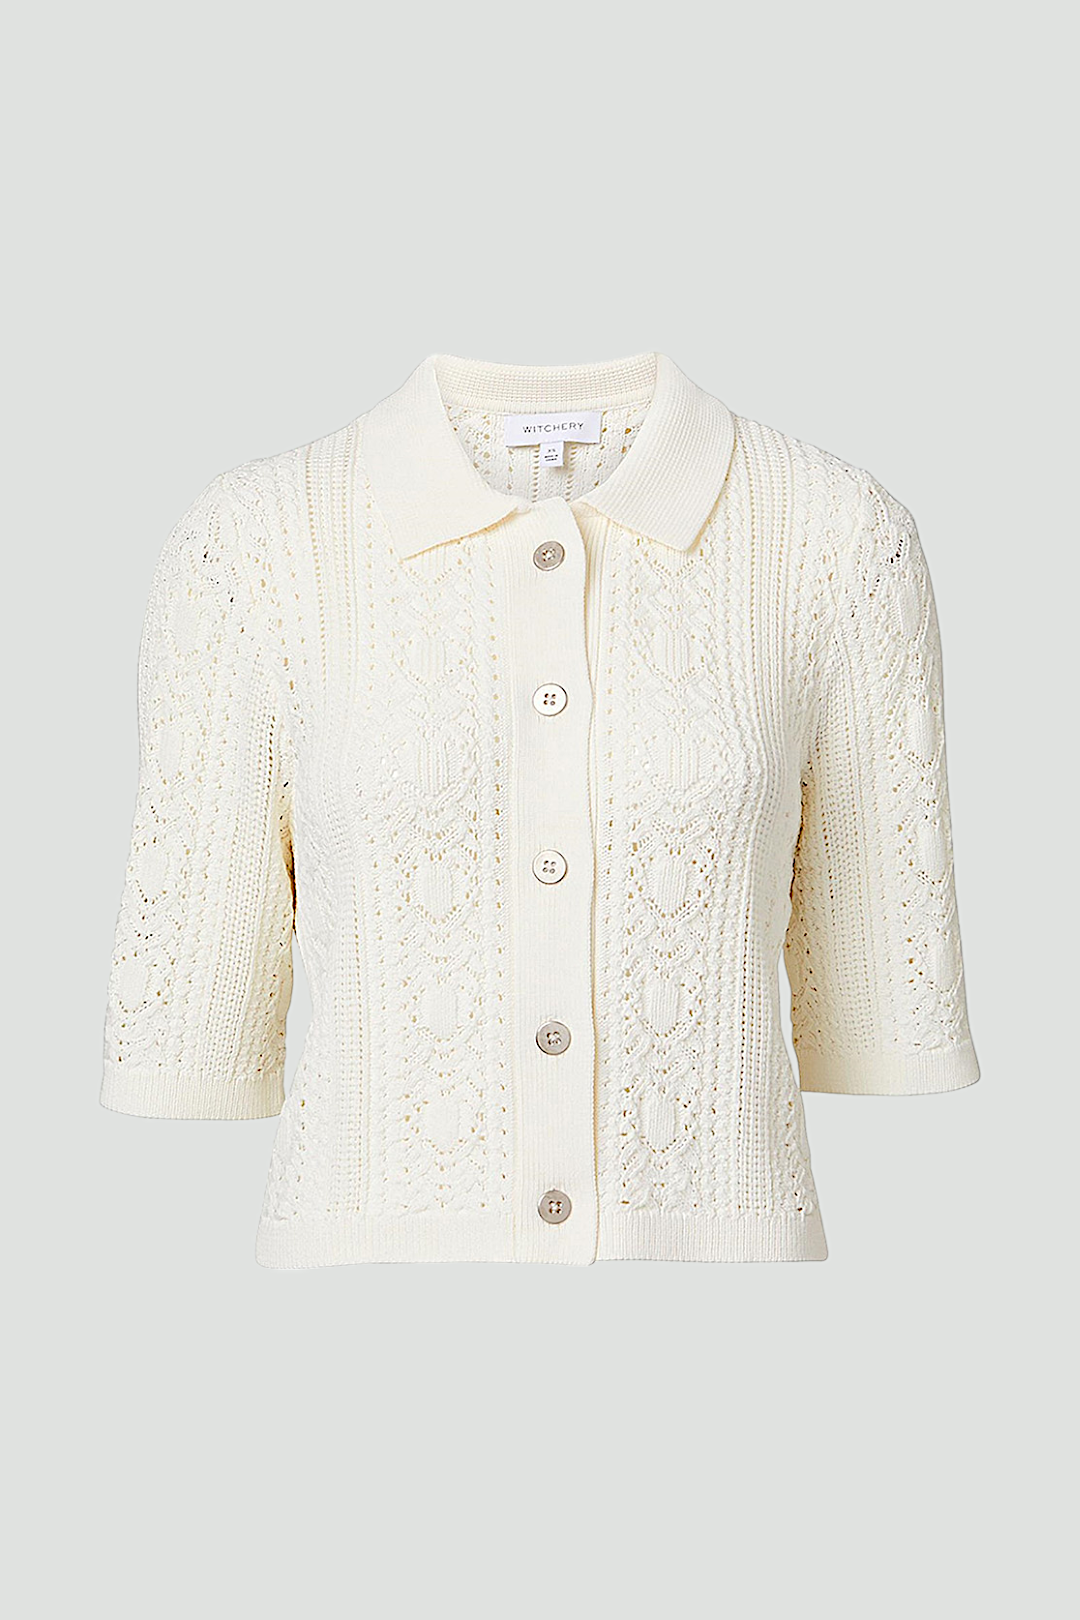 Witchery Boxy Crochet Knit Top in Off White